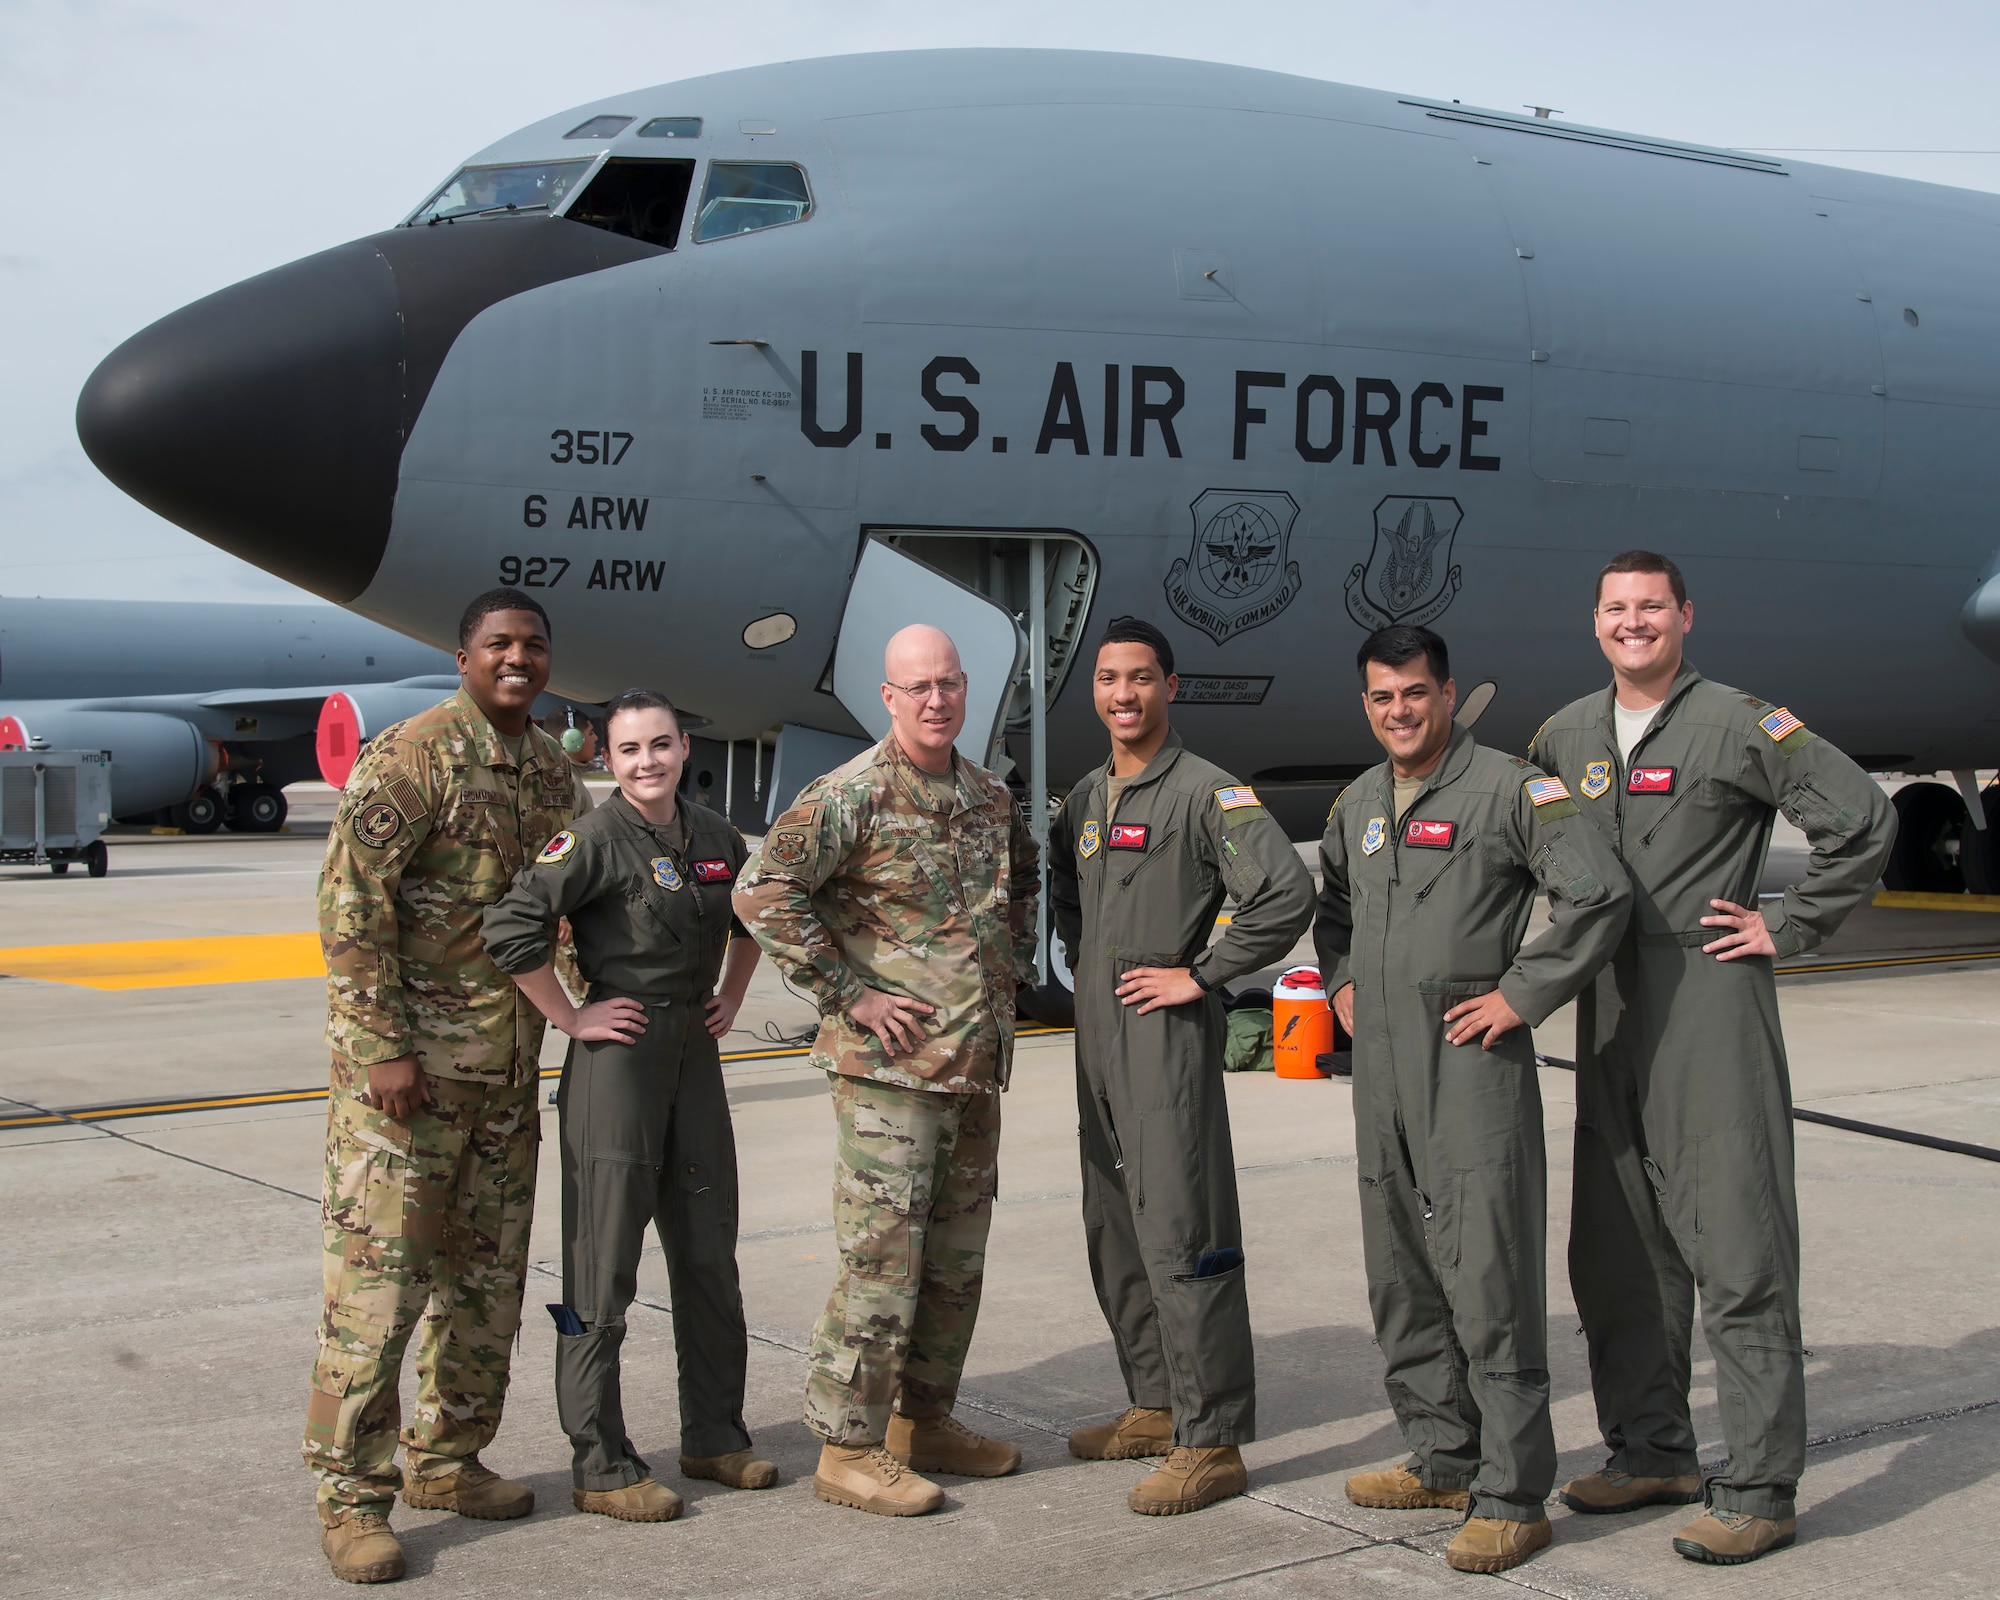 U.S. Air Force Chief Master Sgt. Daniel Simpson, the 18th Air Force command chief, pauses for a photo with 50th Air Refueling Squadron aircrew at MacDill Air Force Base, Fla., Jan. 30, 2020.